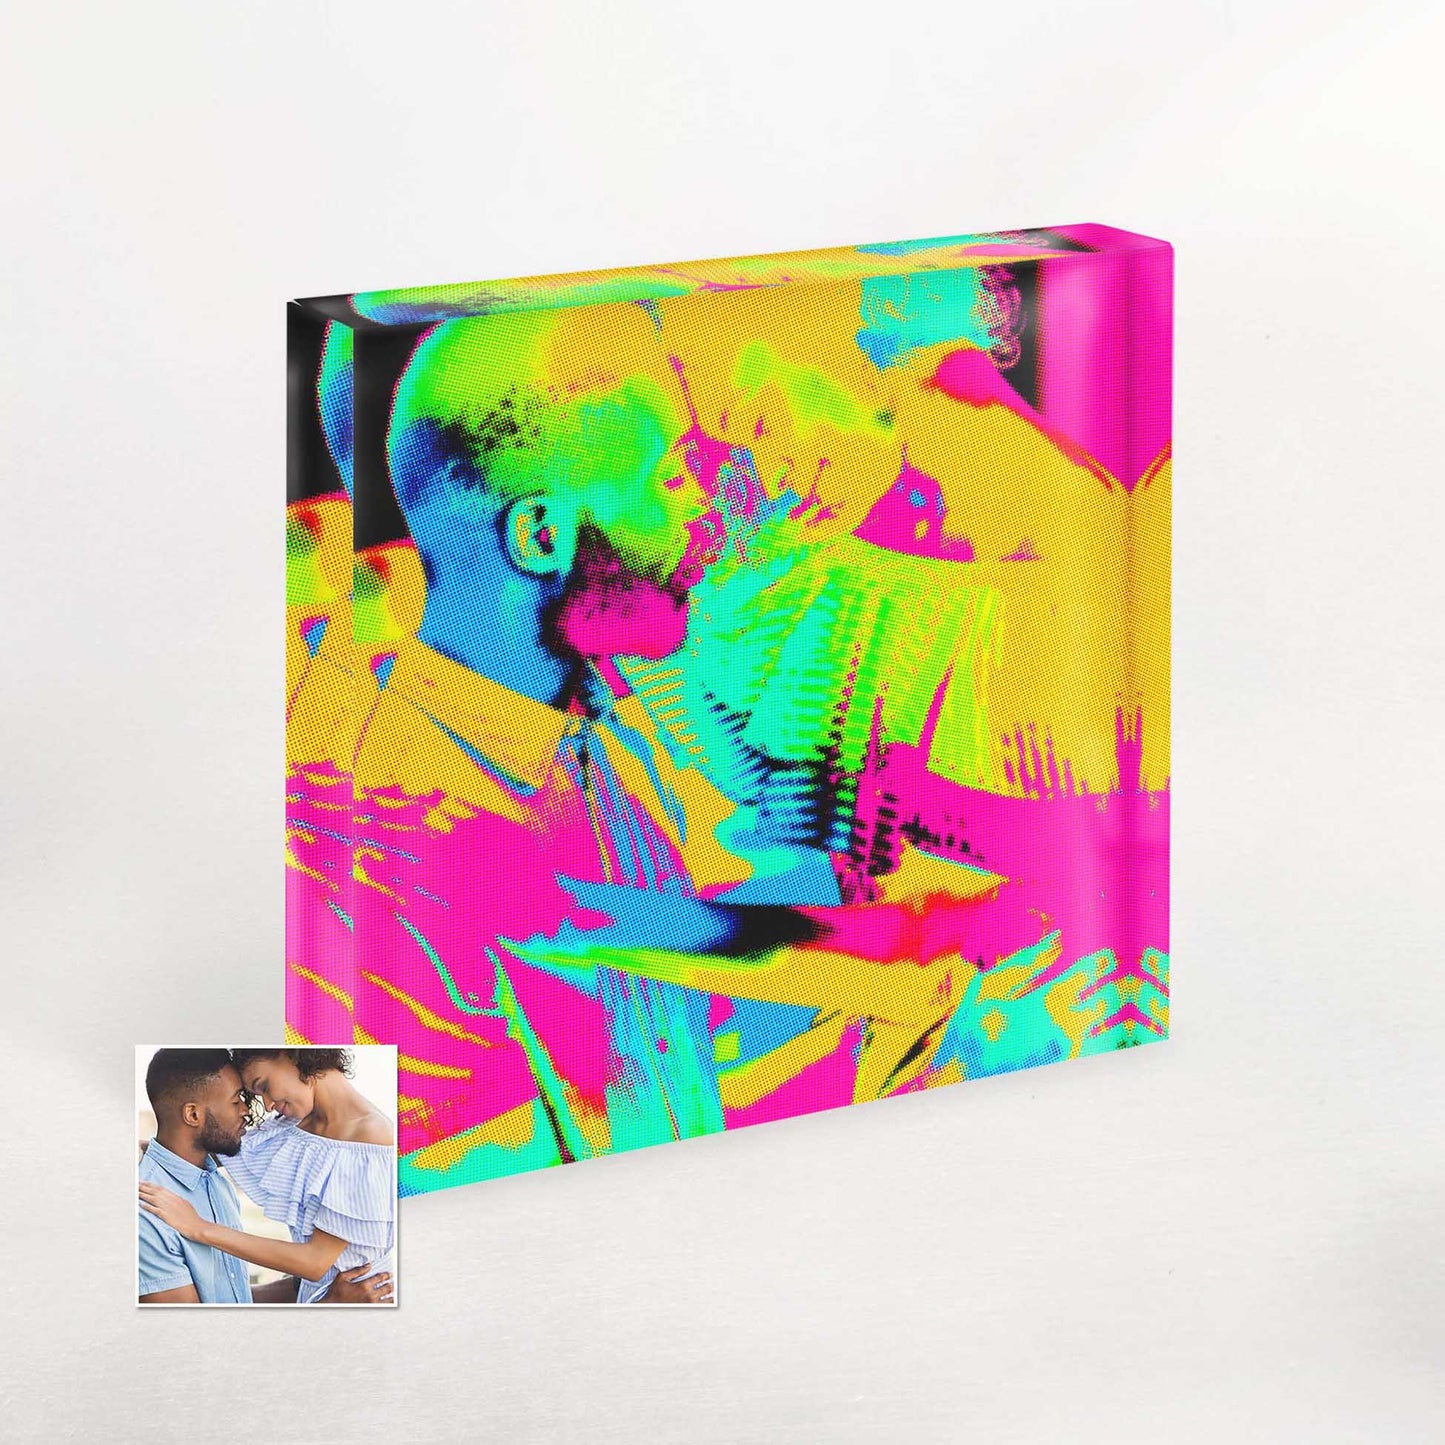 Experience the vibrant energy of the Personalised Pop Art Acrylic Block Photo. Its colorful and bright design exudes fun and excitement, making it a unique and lively birthday or anniversary gift